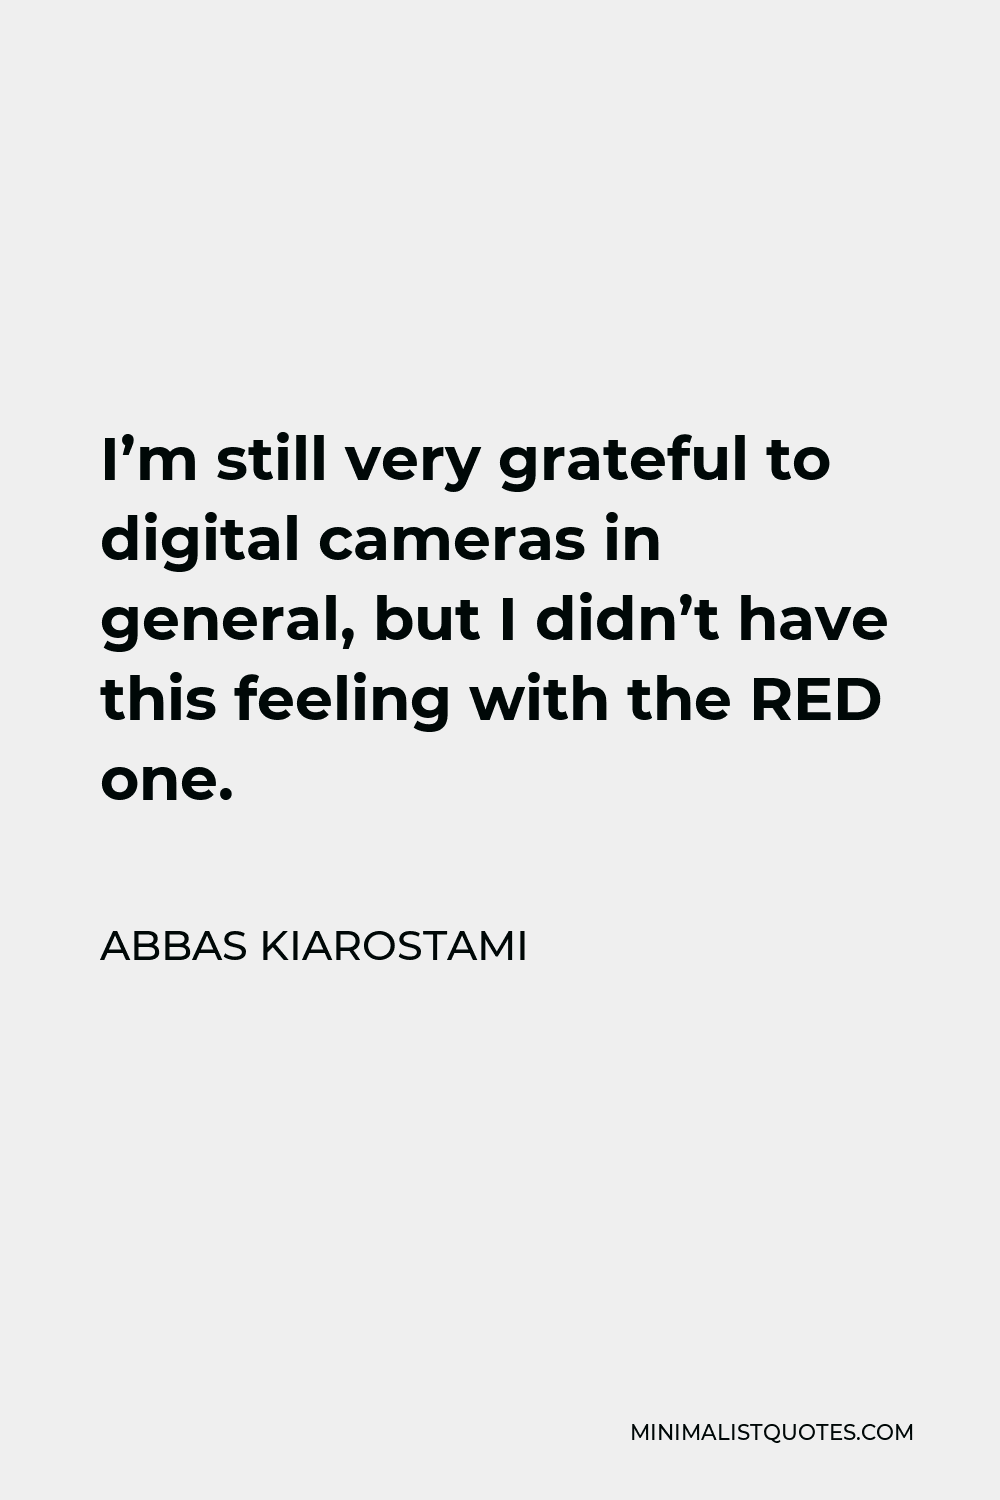 Abbas Kiarostami Quote - I’m still very grateful to digital cameras in general, but I didn’t have this feeling with the RED one.